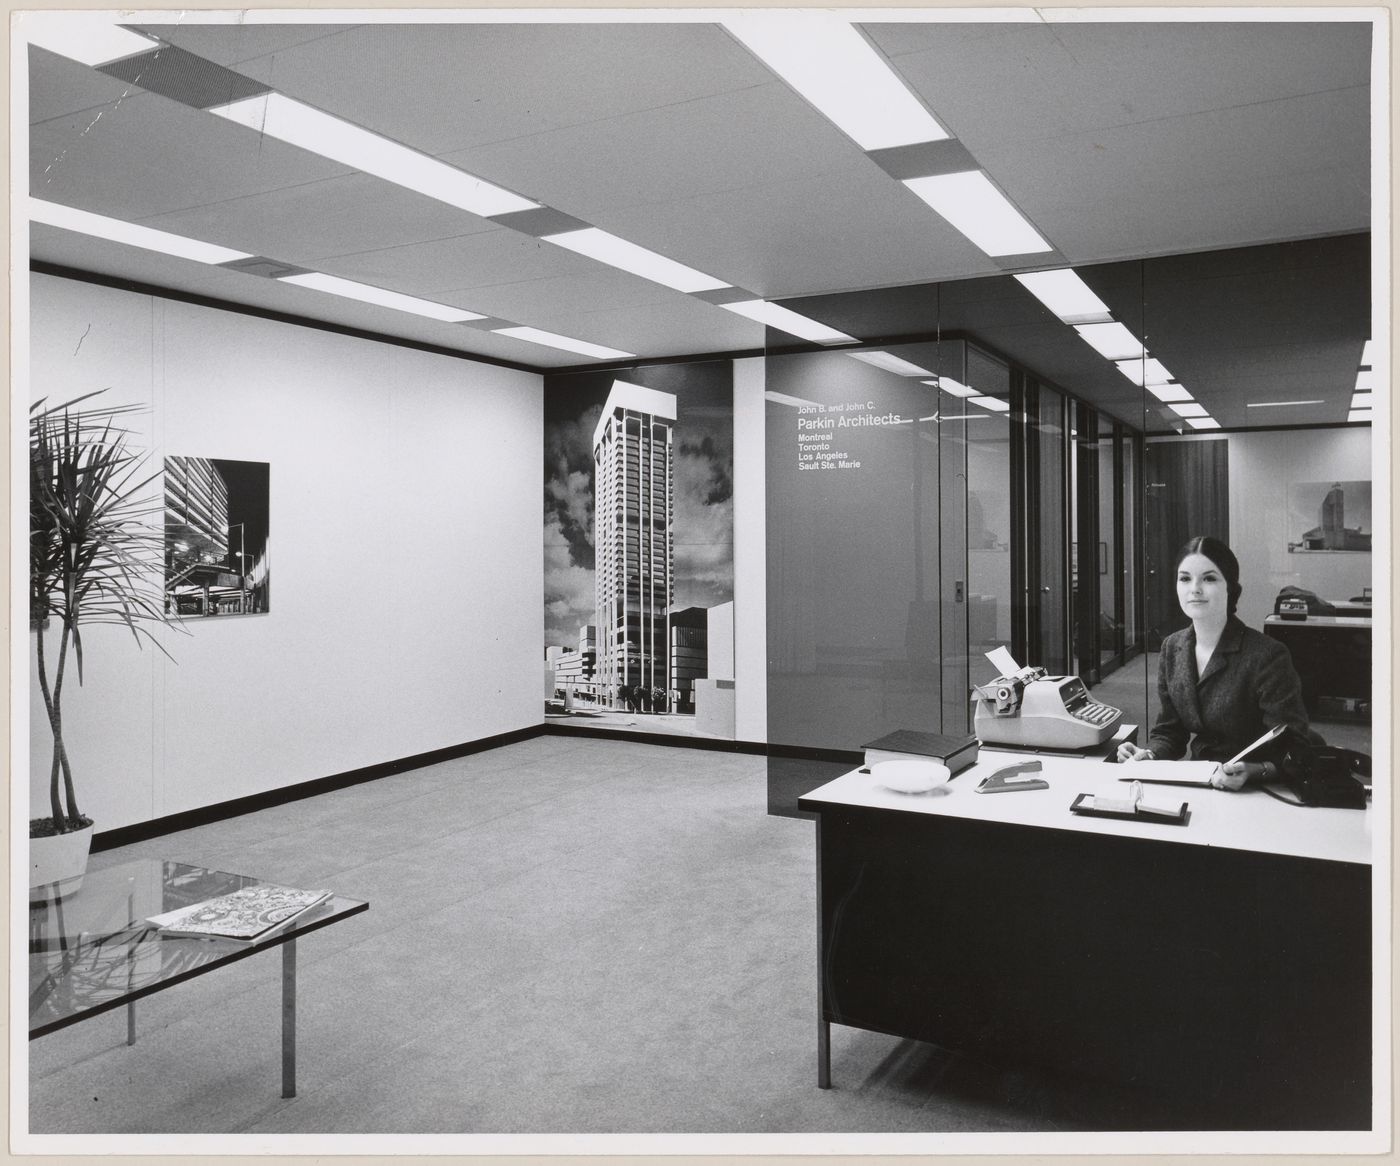 Interior view of John B. Parkin Associates office with employee at desk, possibly Montreal office